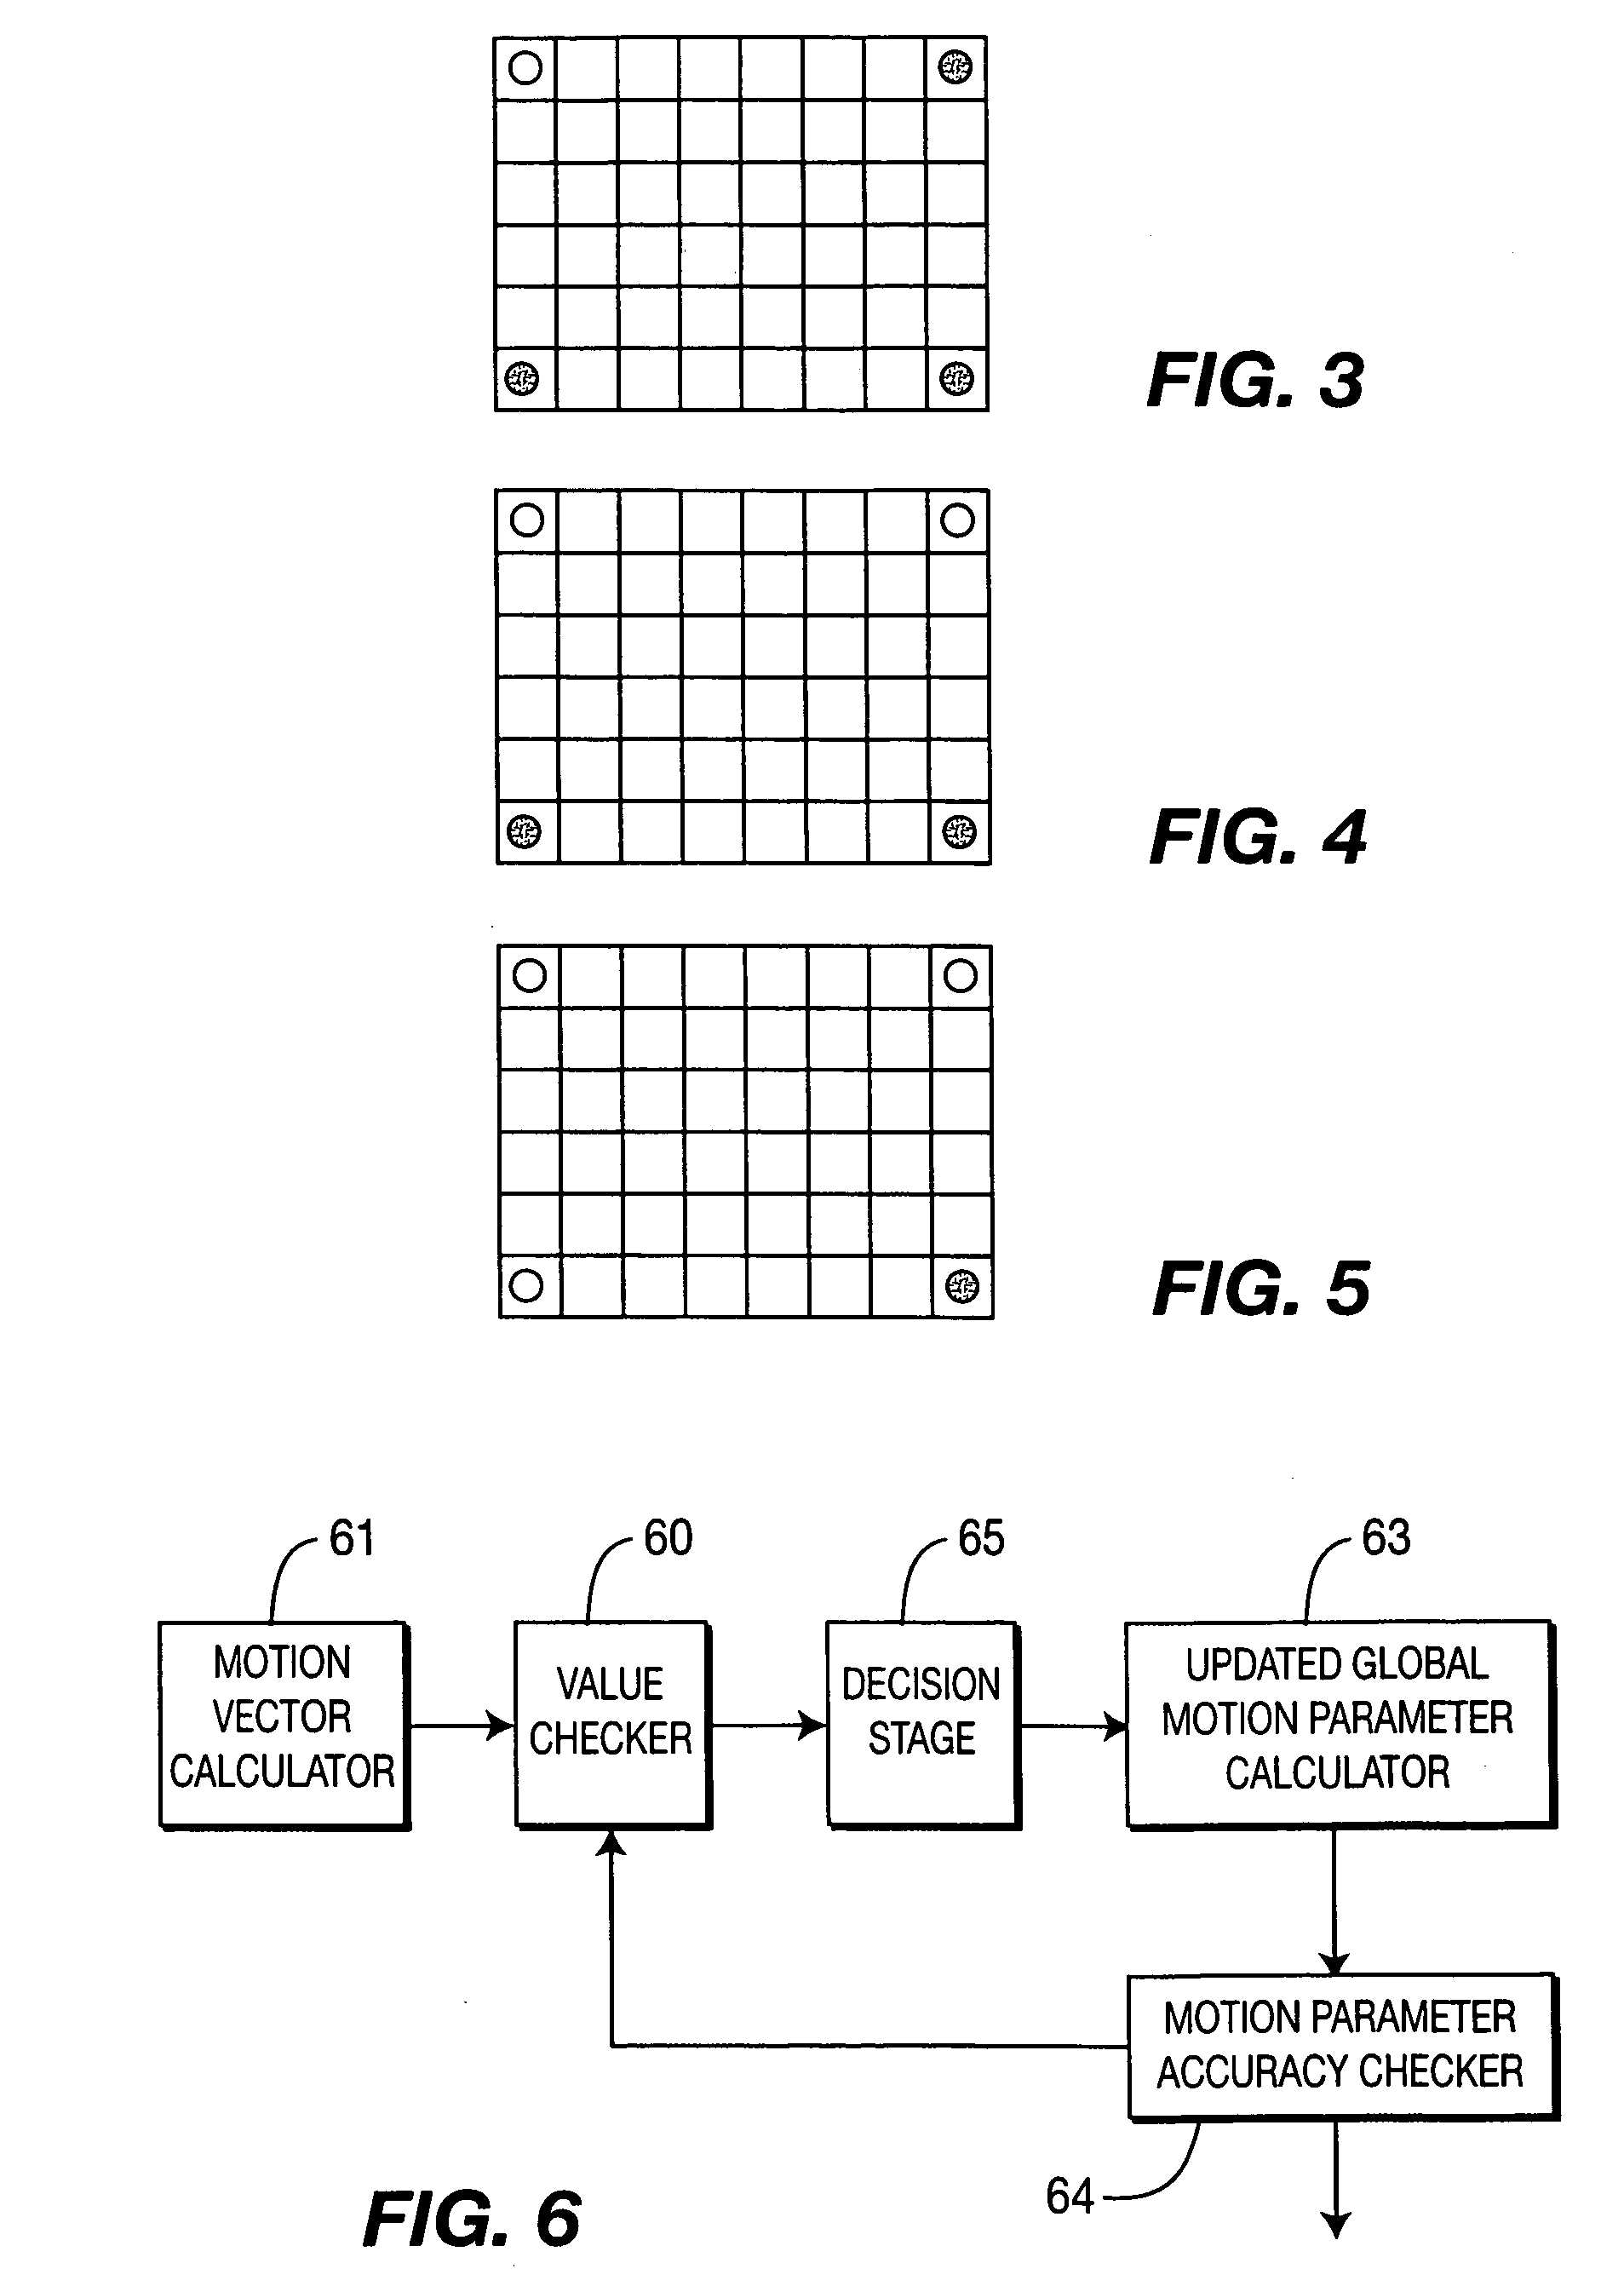 Method and apparatus for calculating interatively for a picture or a picture sequence a set of global motion parameters from motion vectors assigned to blocks into which each picture is divided